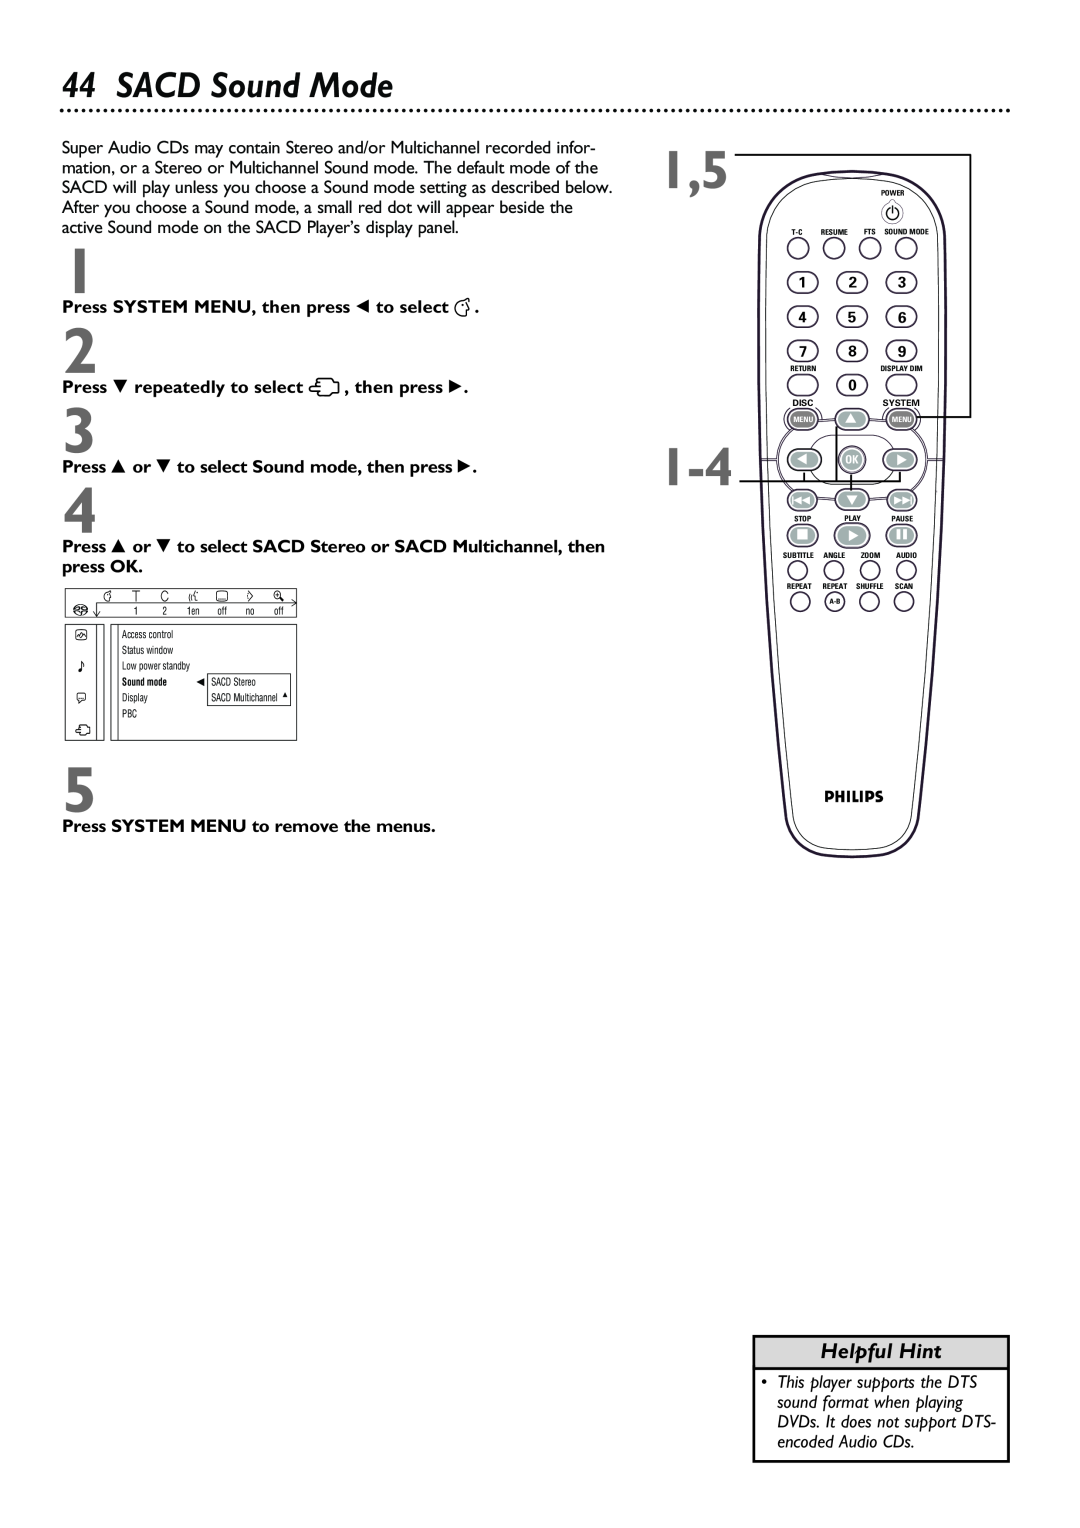 Philips DVD962SA owner manual SACD Sound Mode, 1,5 1-4, Helpful Hint, encoded Audio CDs 